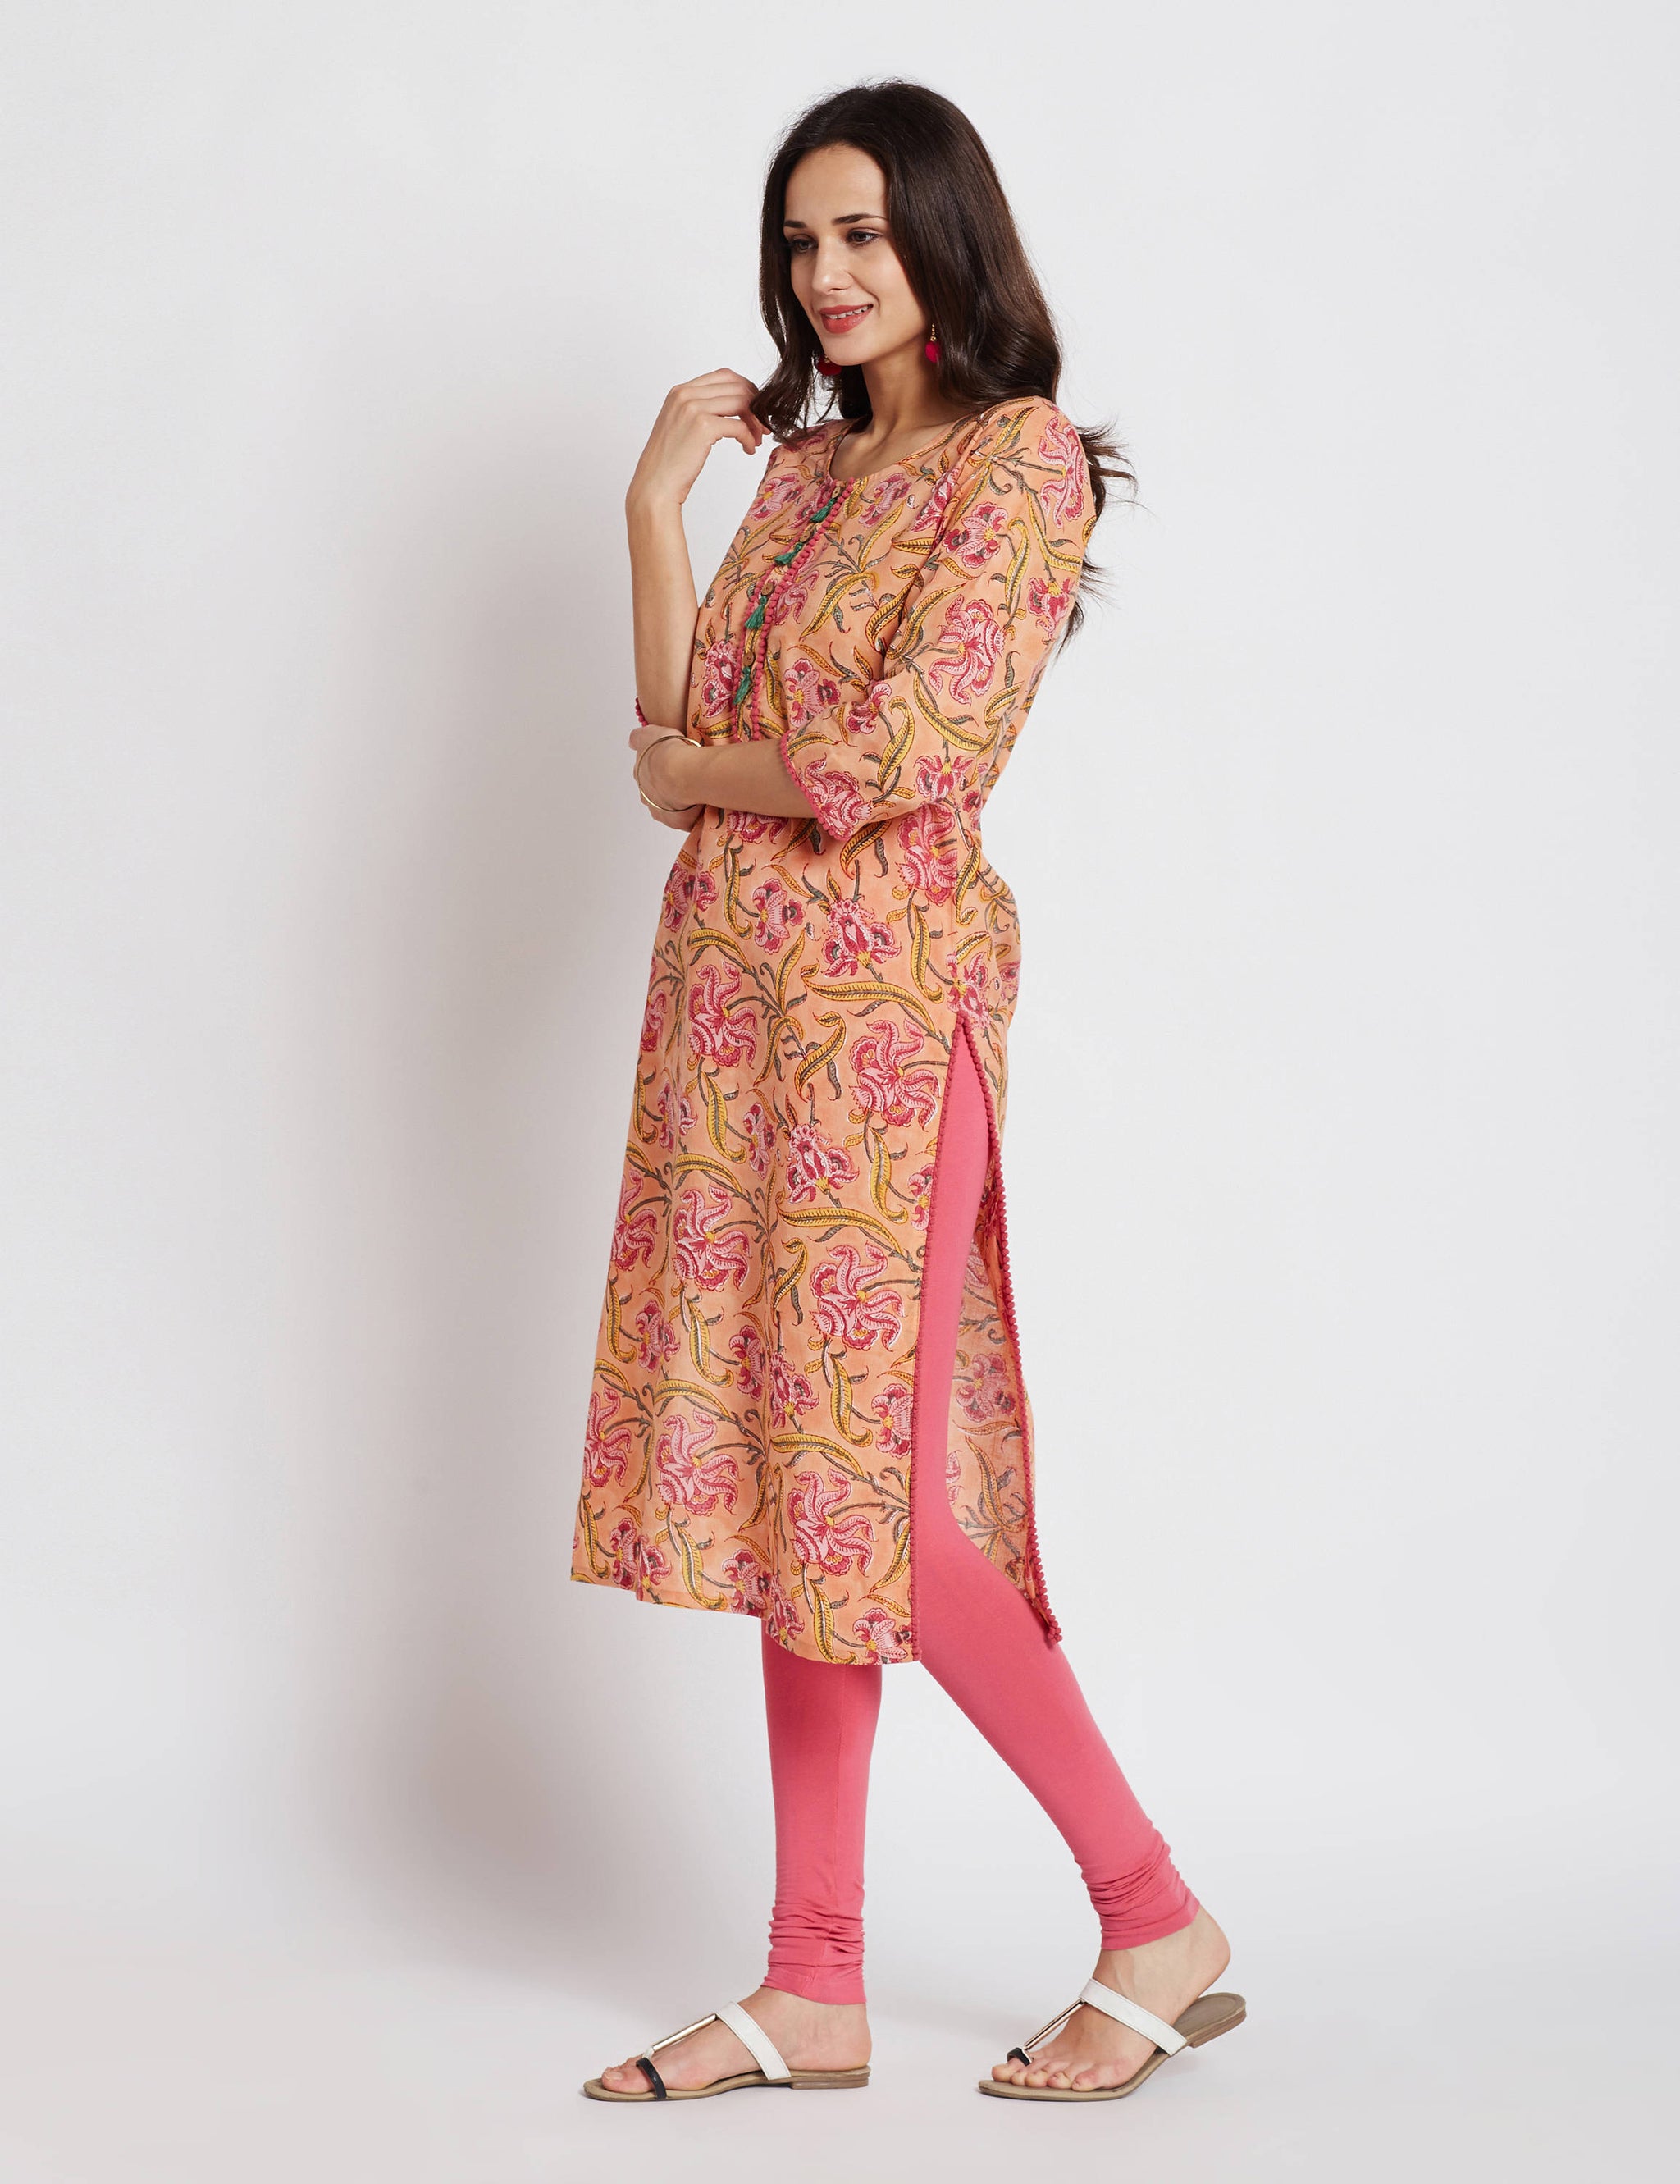 Hand block printed ethnic long Indian kurta with pompom trims & tassels on front